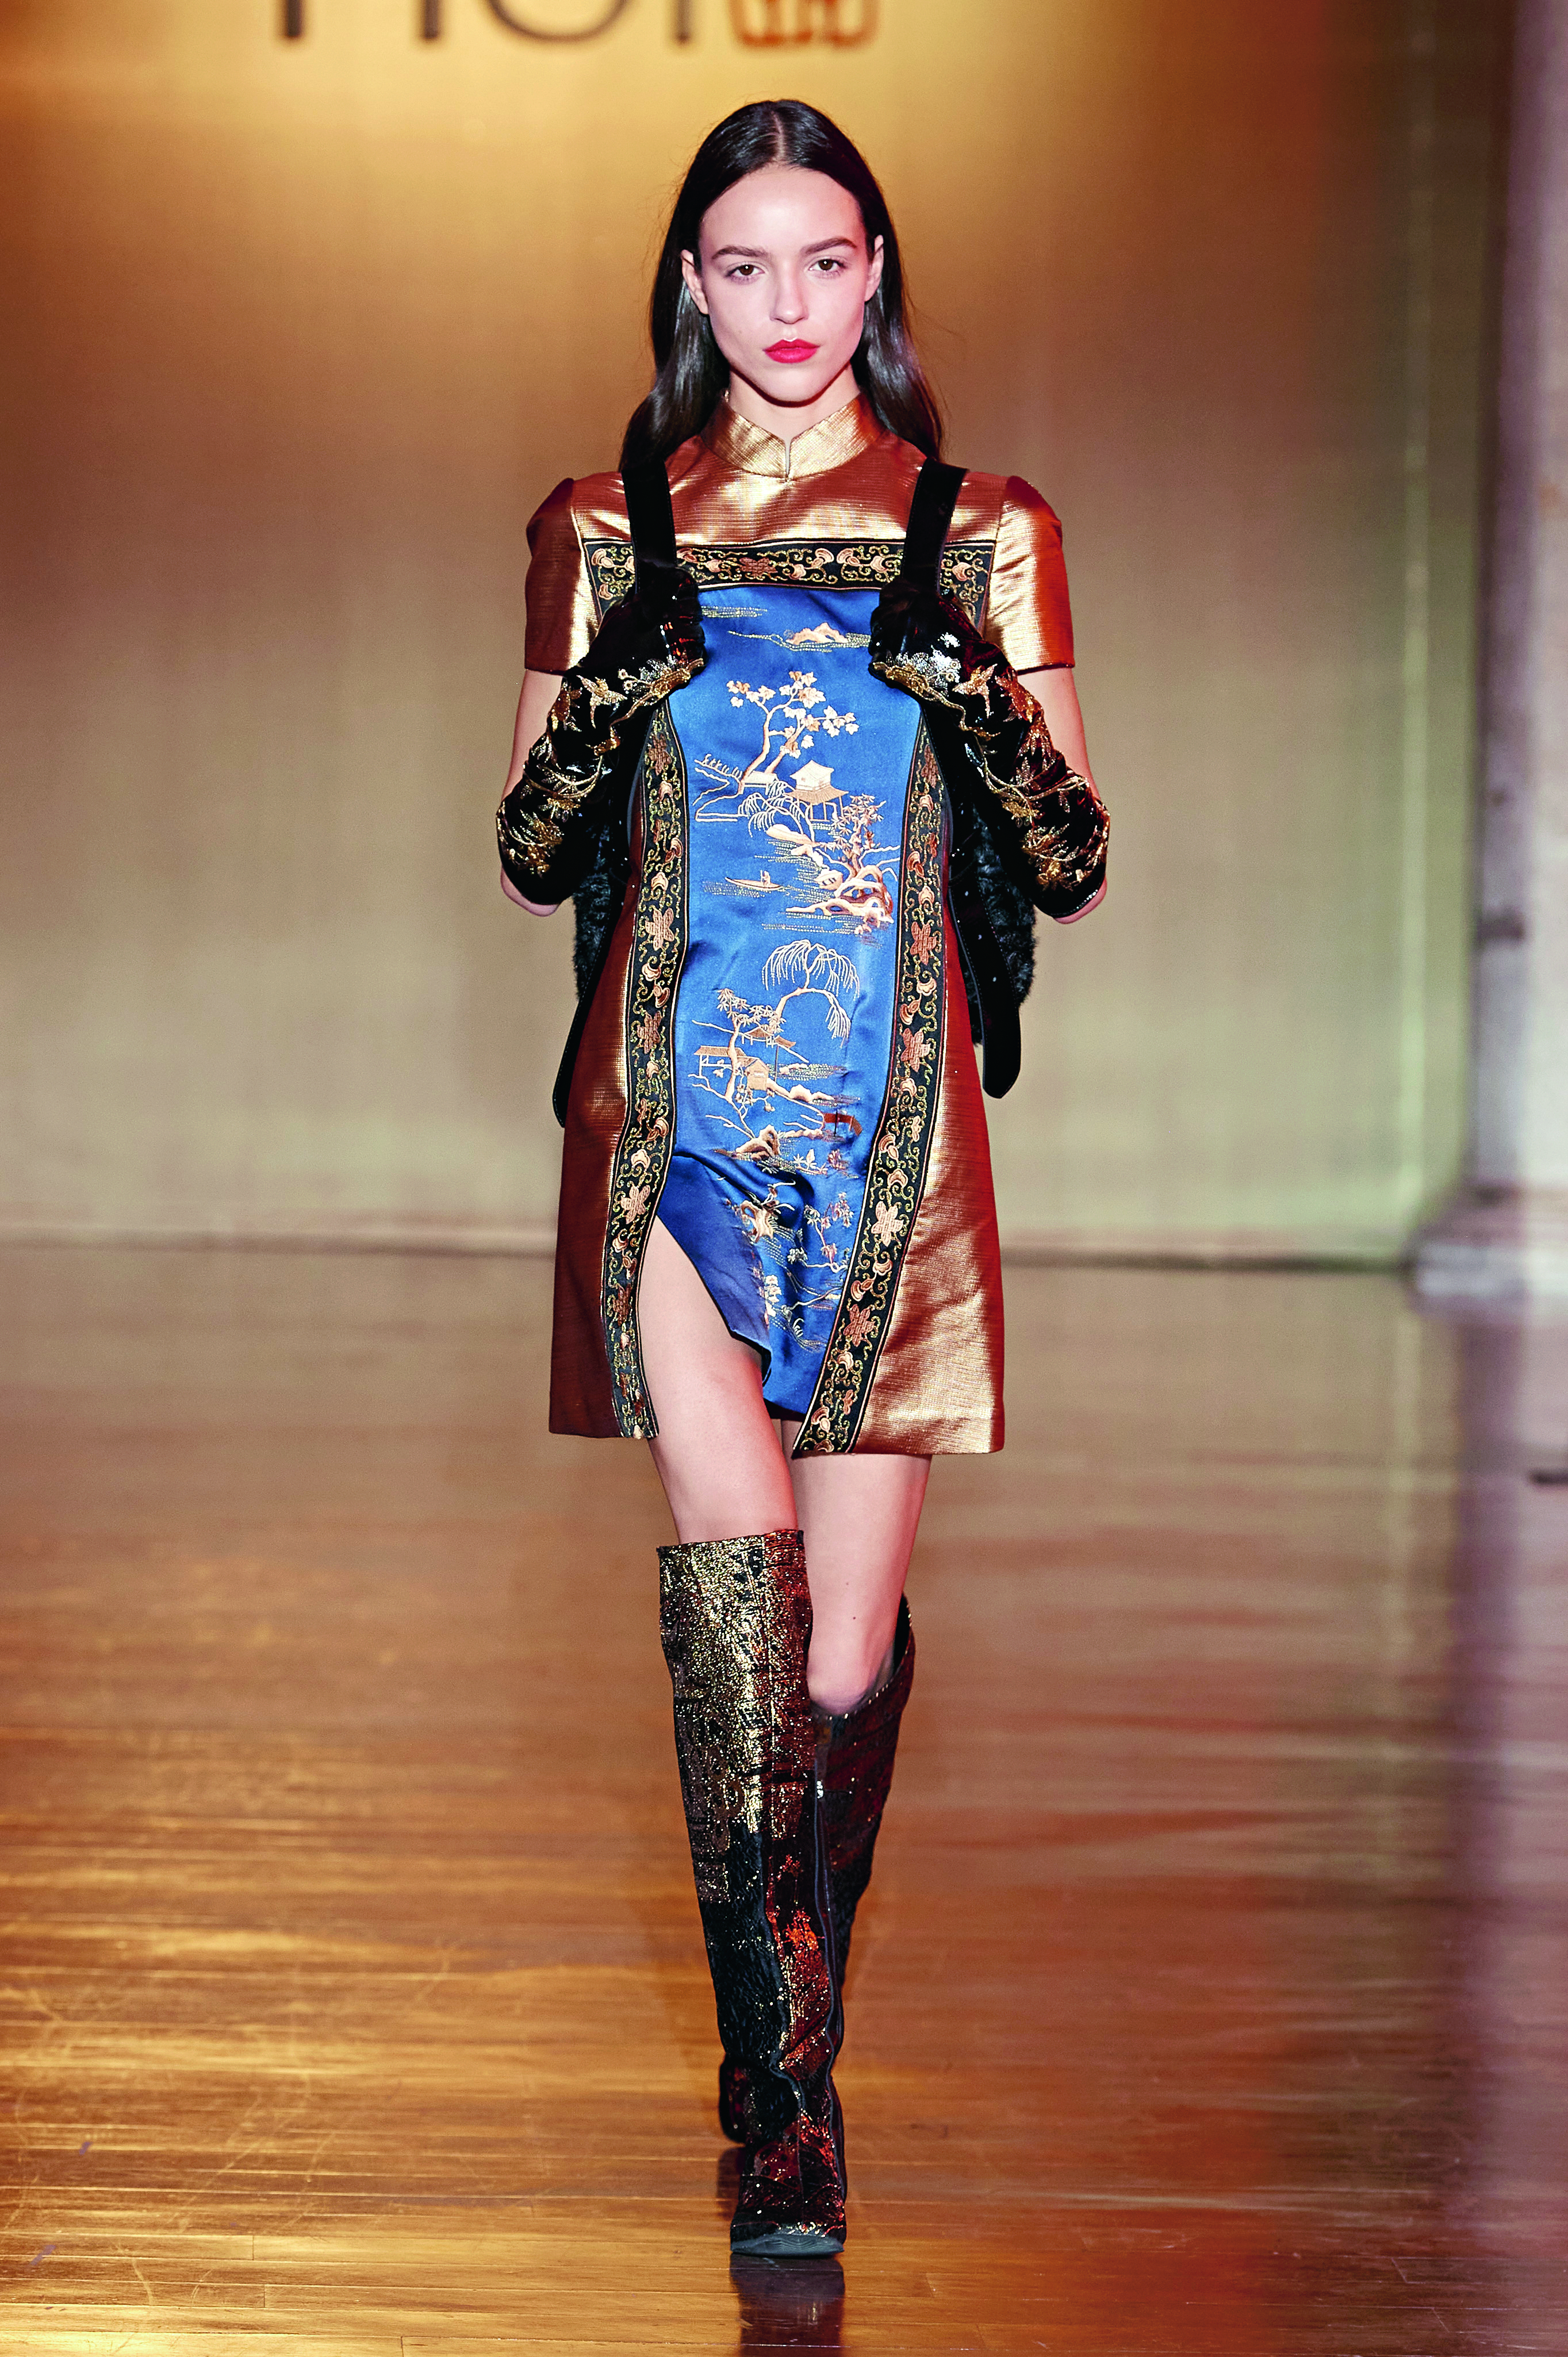 Amazing International Fashions Integrated with Traditional Chinese Cultural Elements